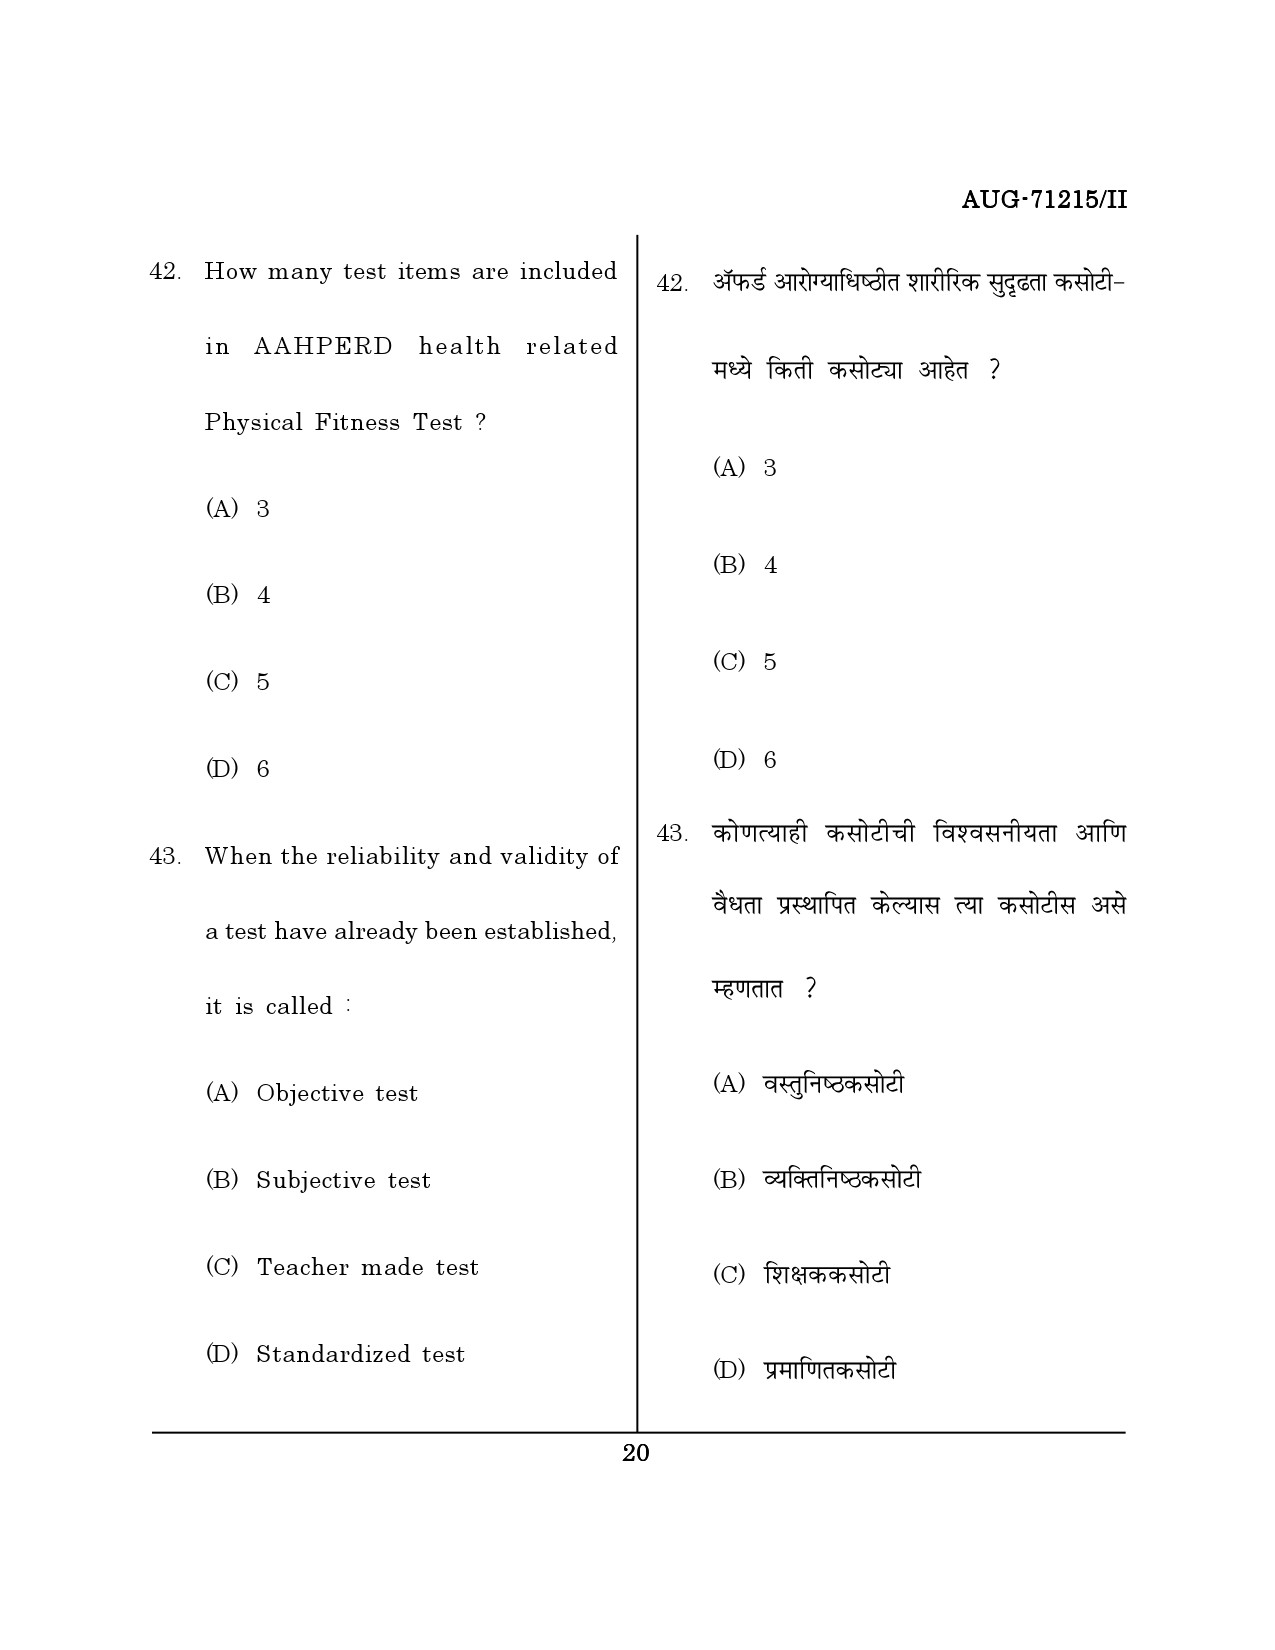 Maharashtra SET Physical Education Question Paper II August 2015 19